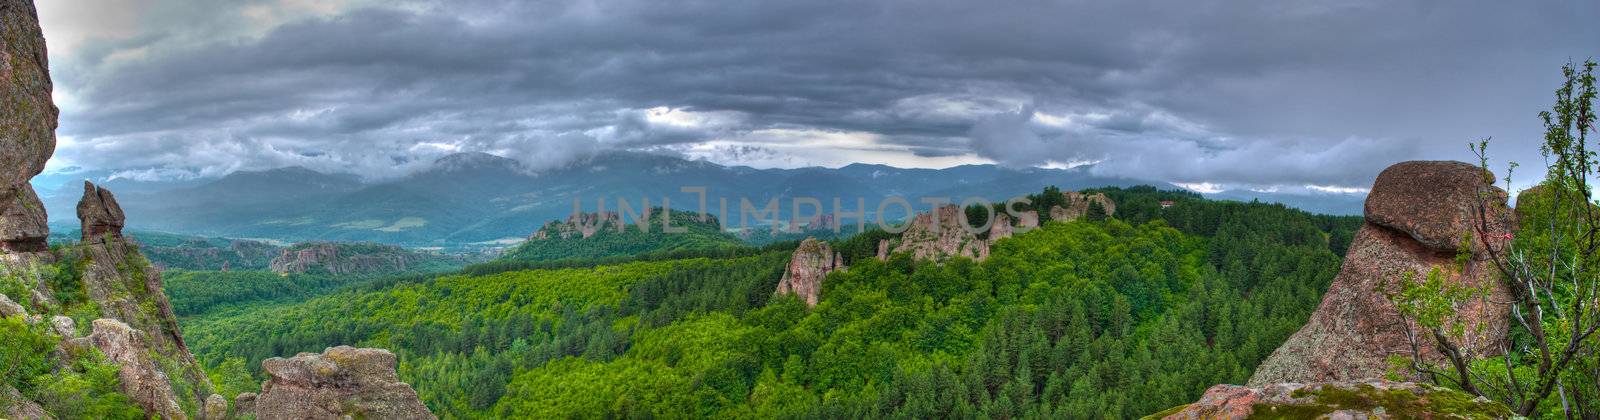 rock formation hdr panorama by Dessie_bg